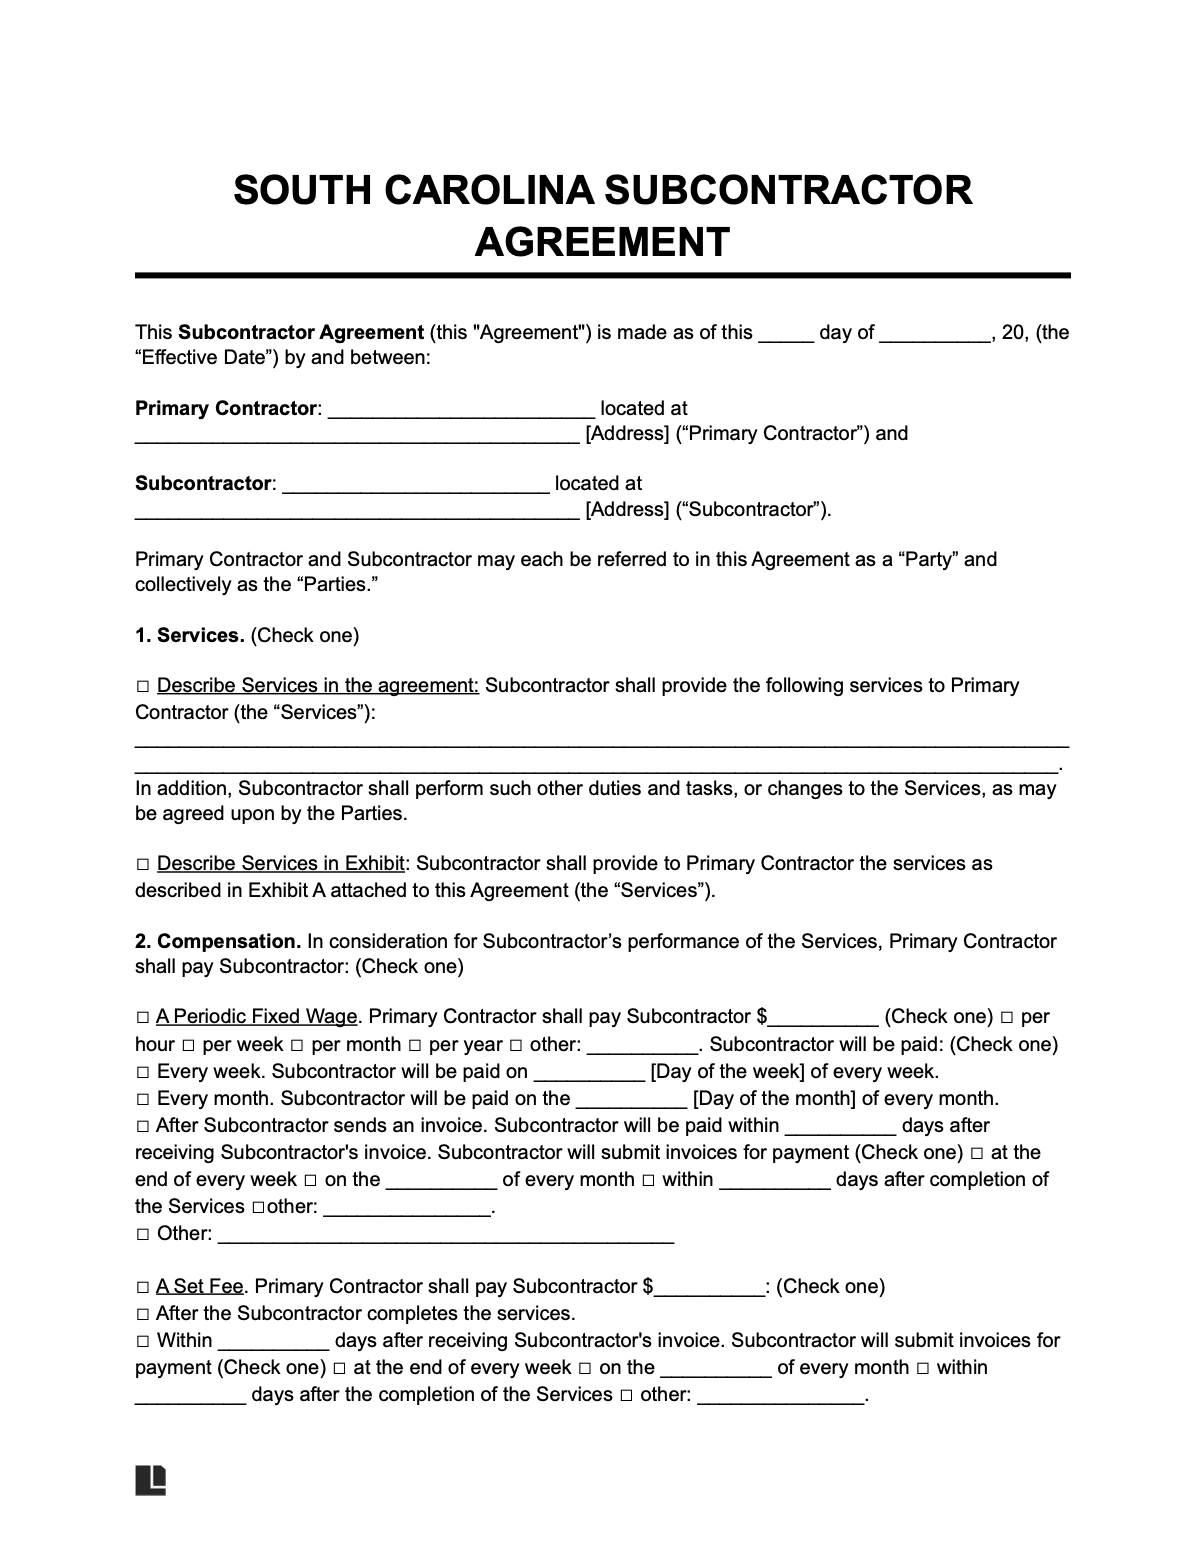 south carolian subcontractor agreement template